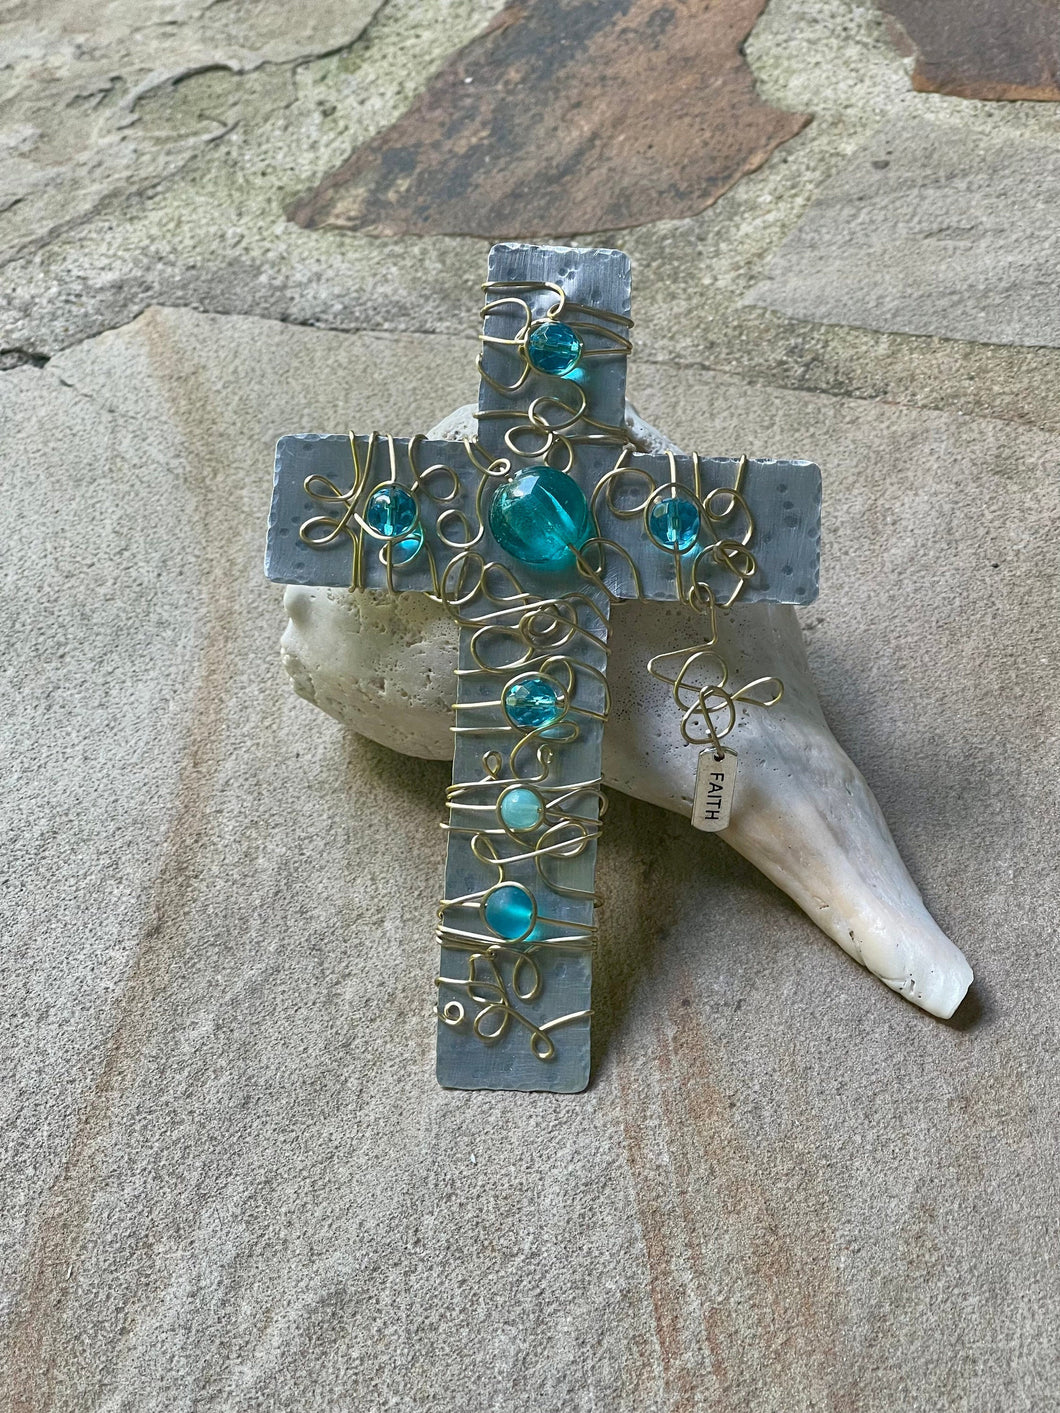 Hammered Aluminum Display Cross Embellished with Gold Wire and Turquoise Colored Beads. Includes a Silver Stand